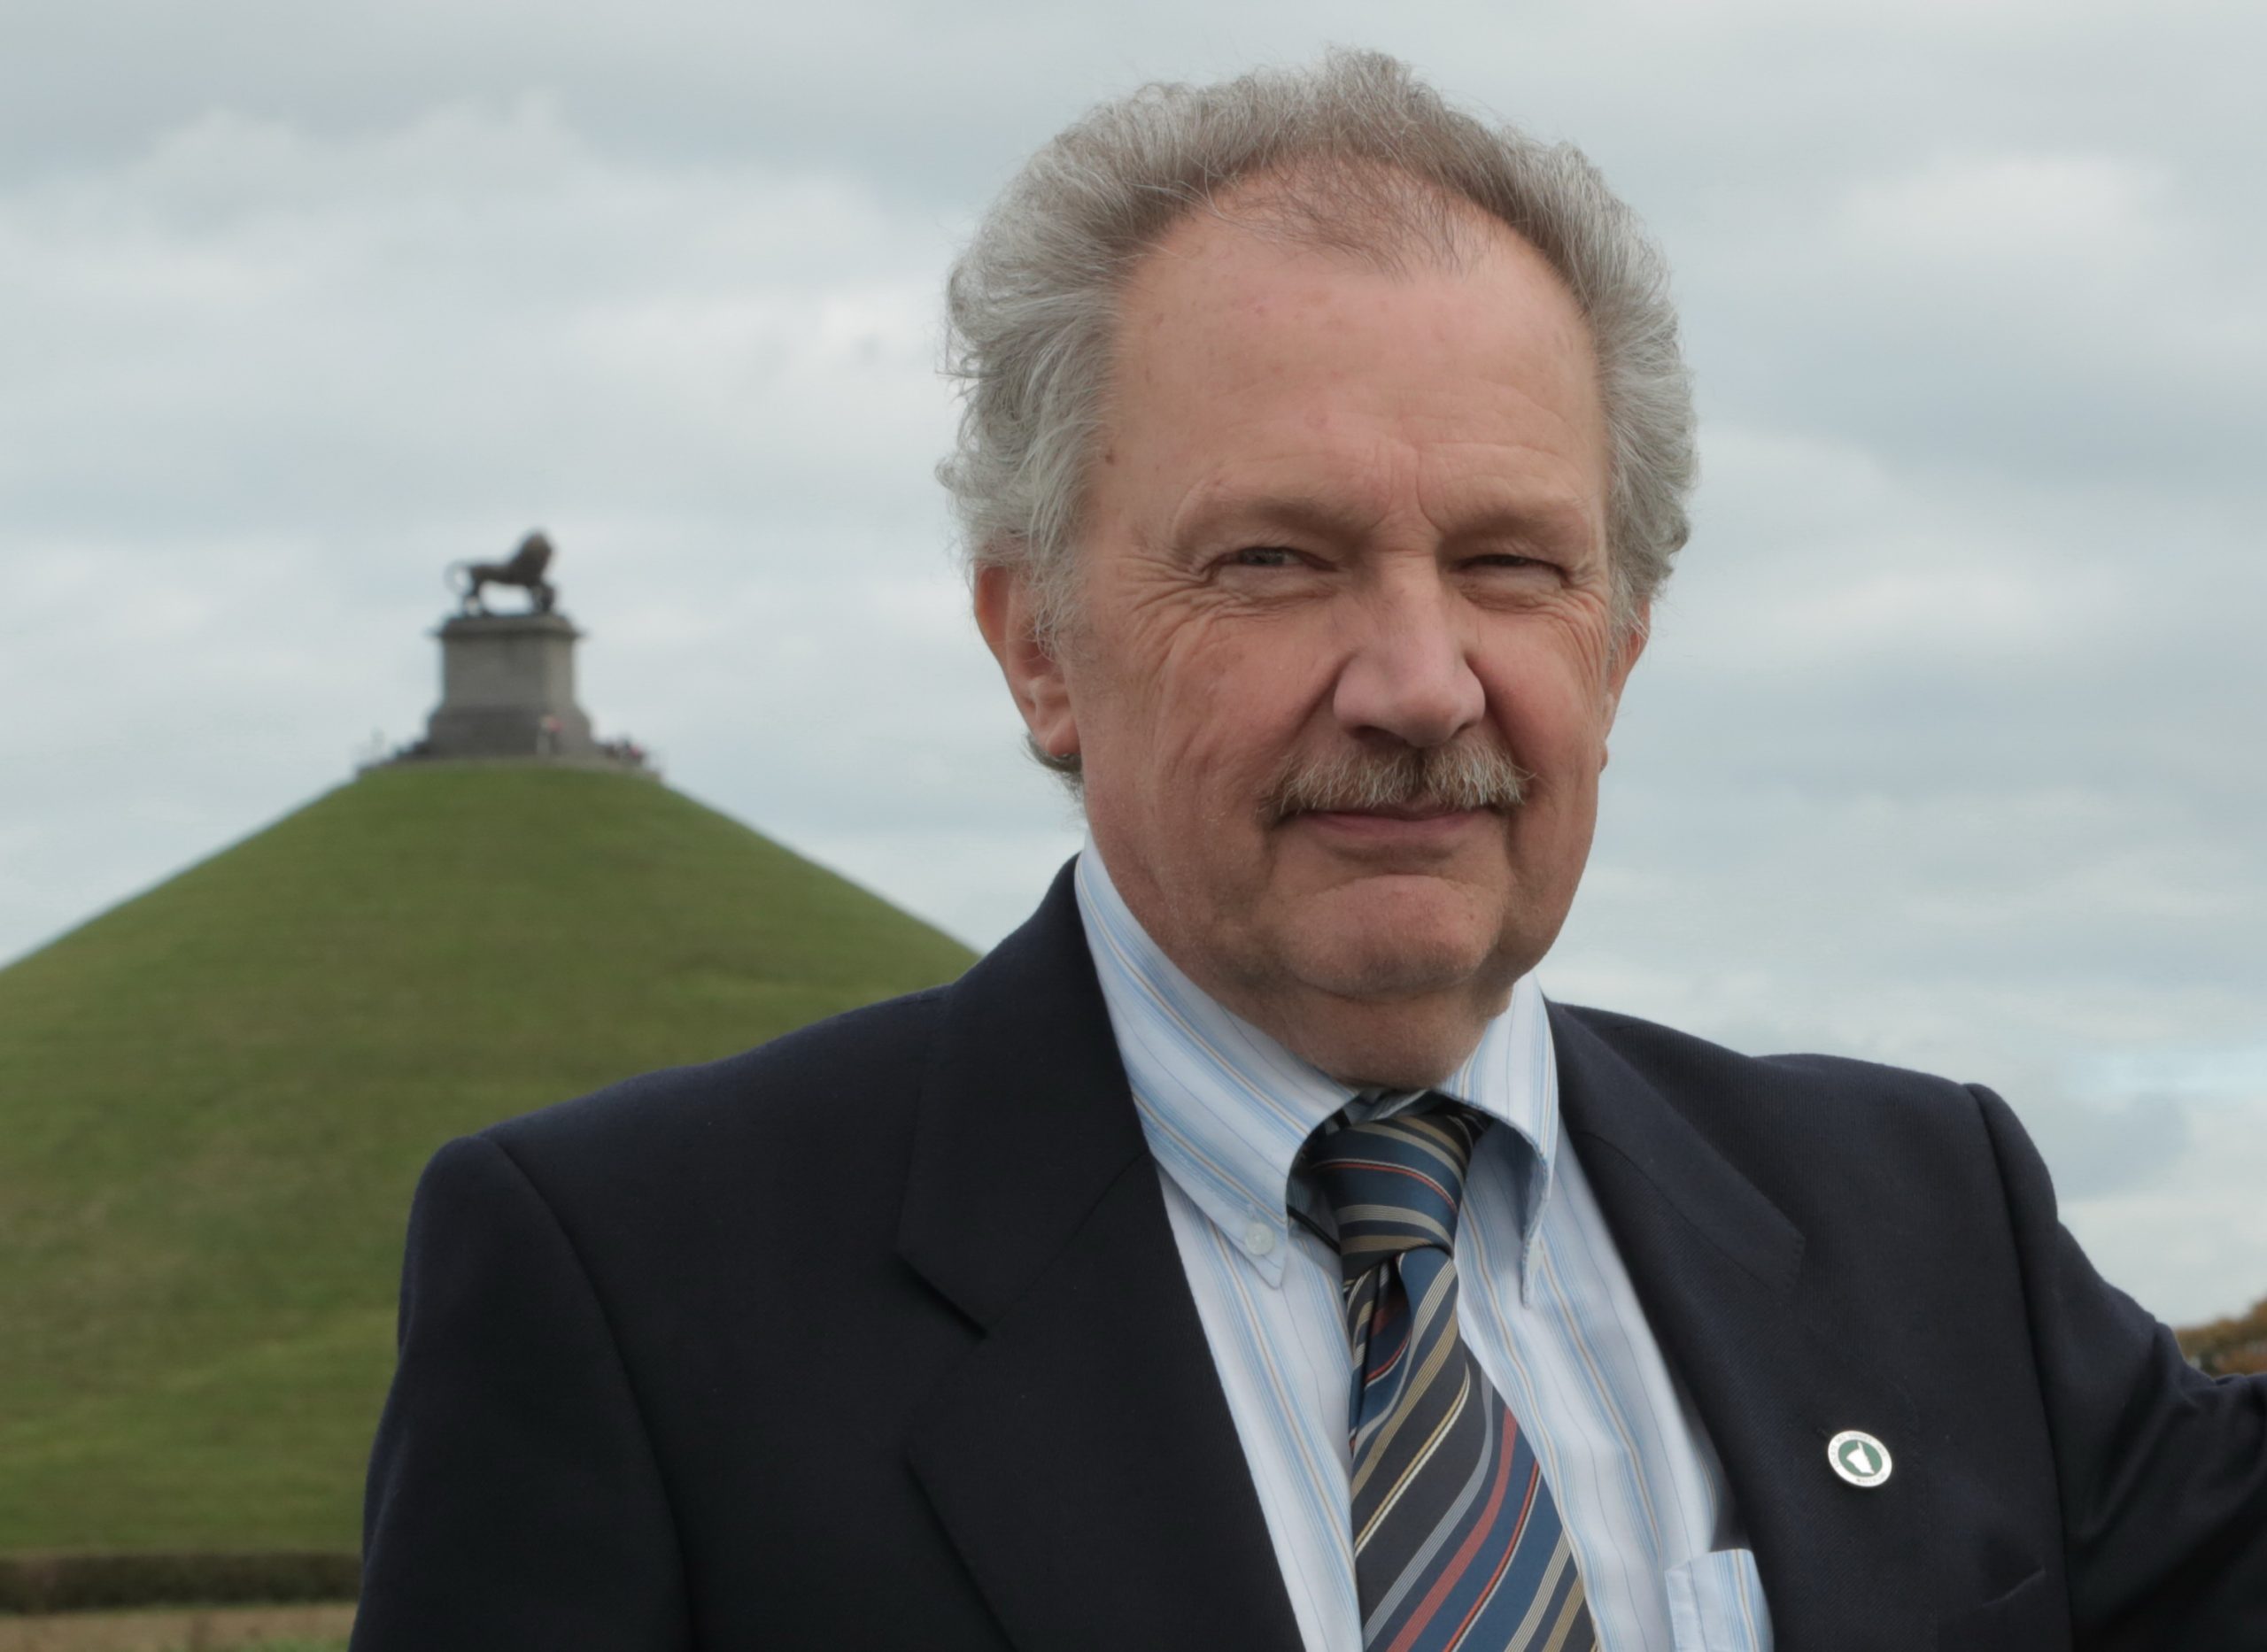 An image of Alain Lacroix next to the Lion's Mound